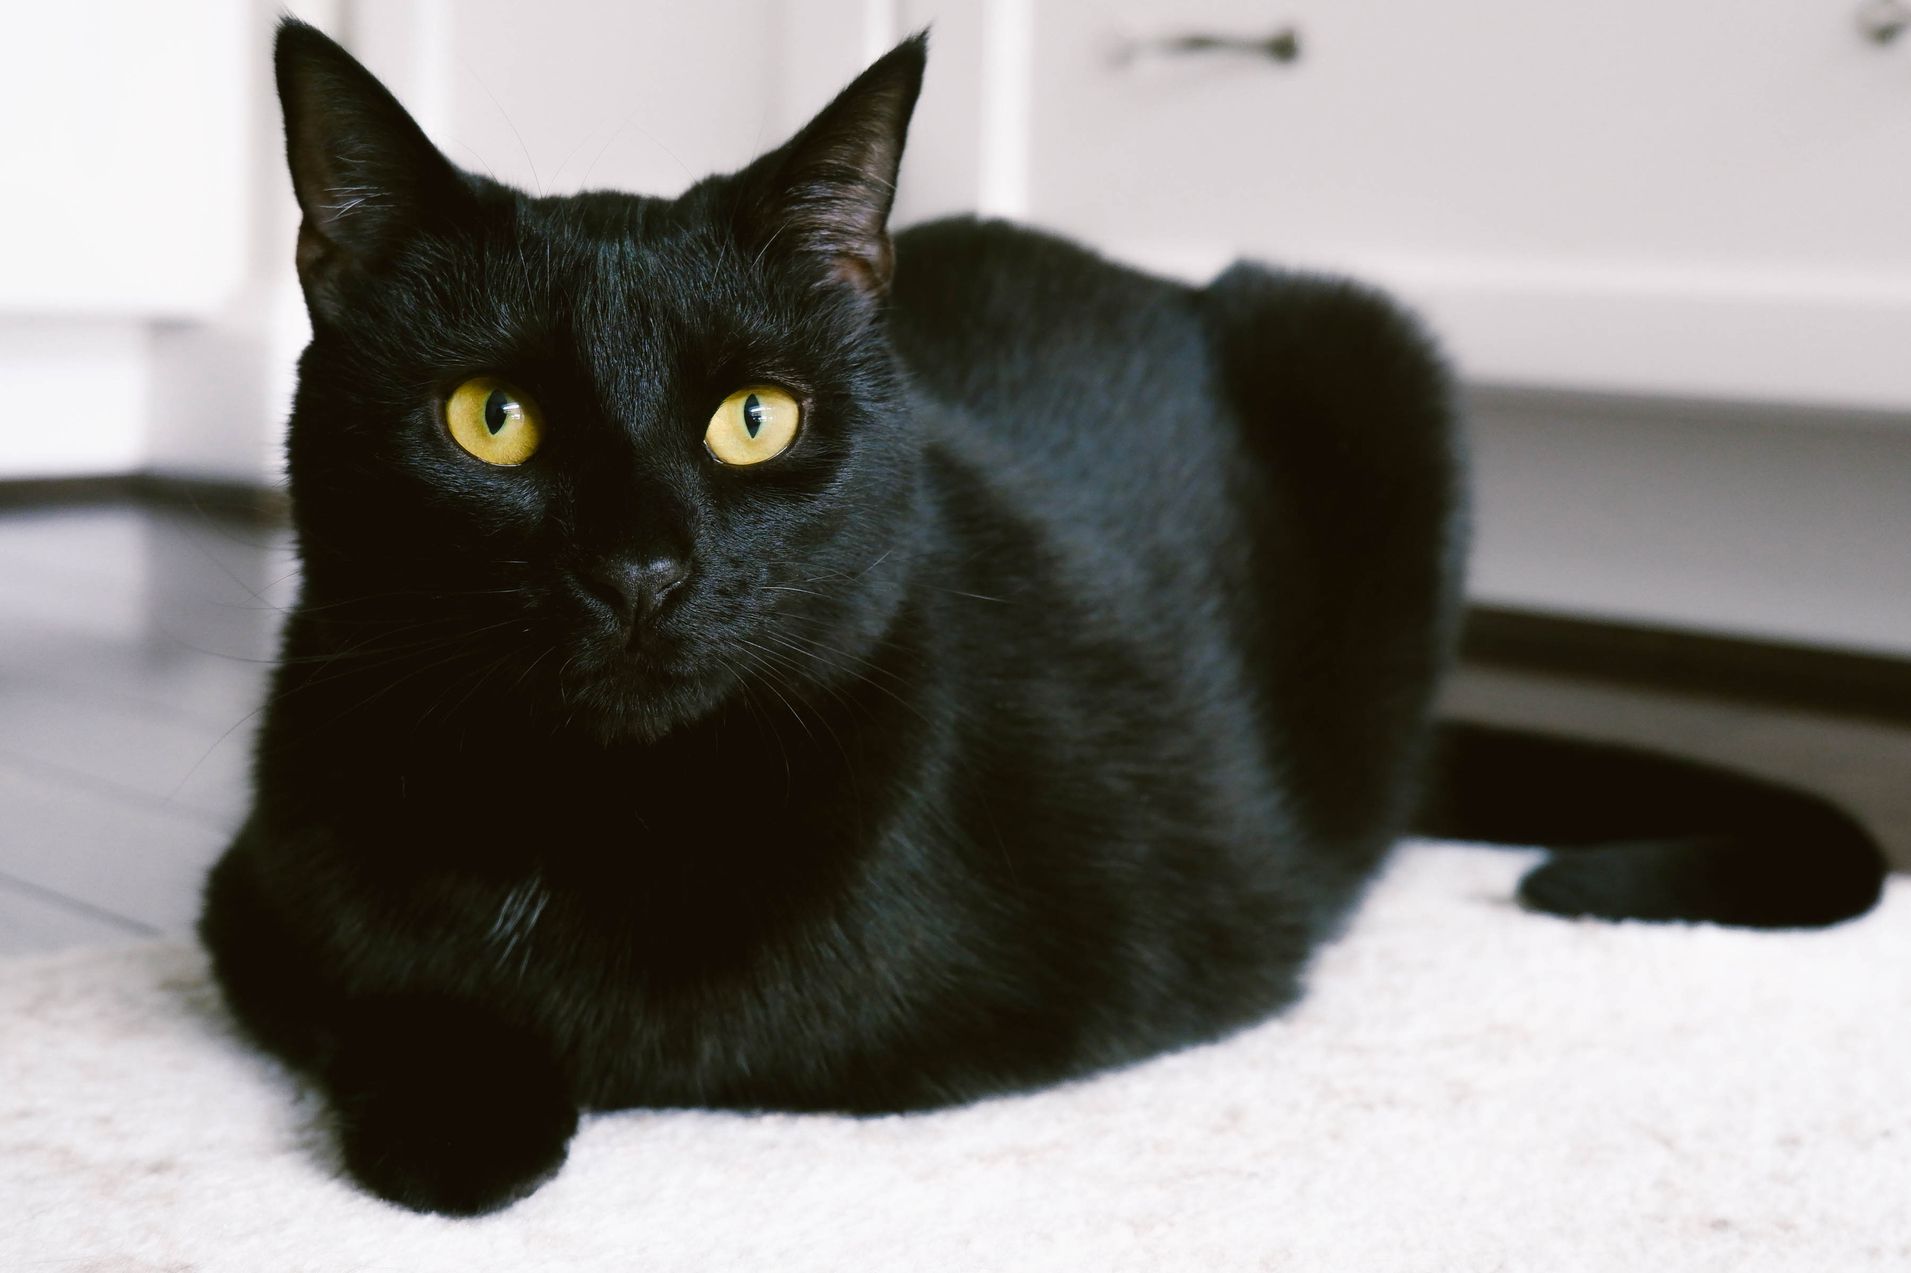 A sleek Bombay black cat with striking copper-colored eyes, exuding elegance and grace.